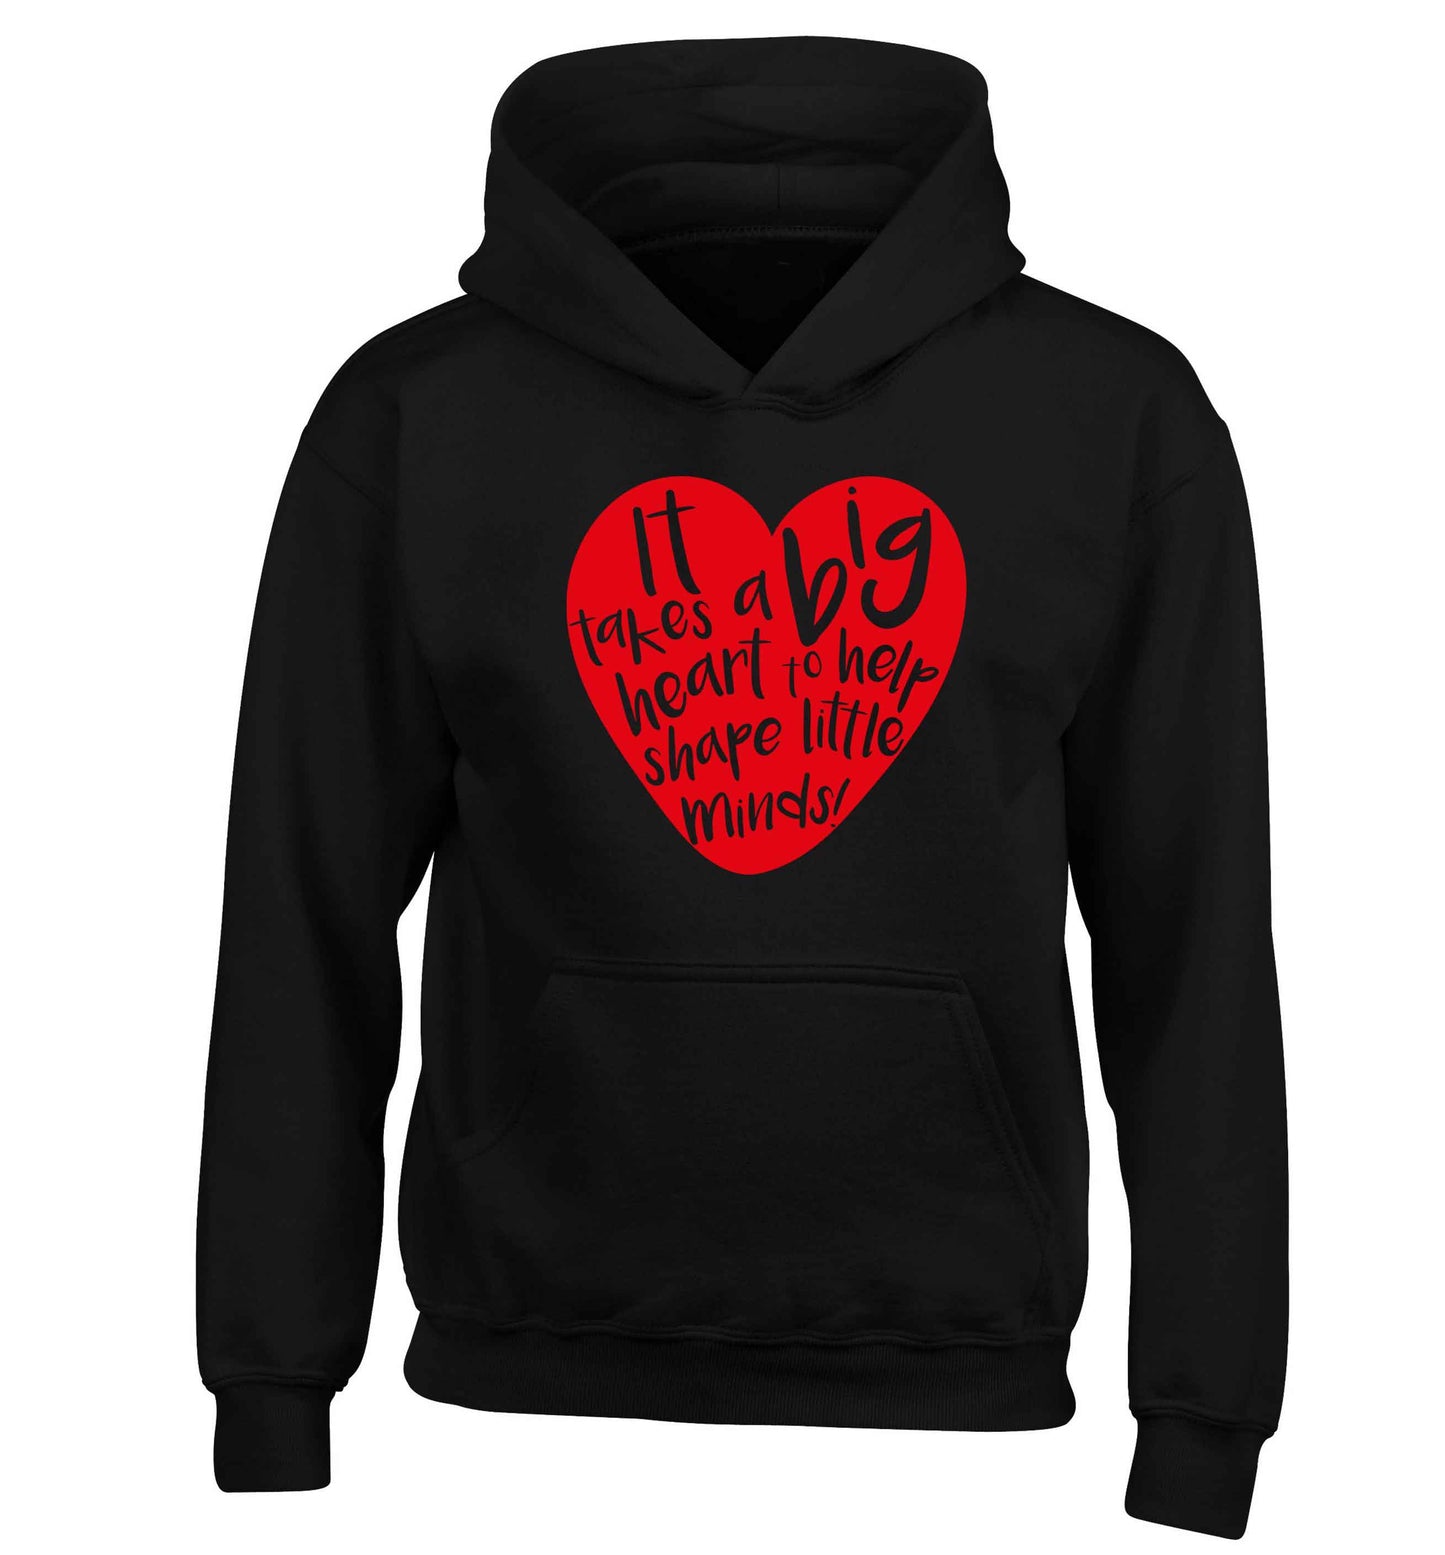 It takes a big heart to help shape little minds children's black hoodie 12-13 Years